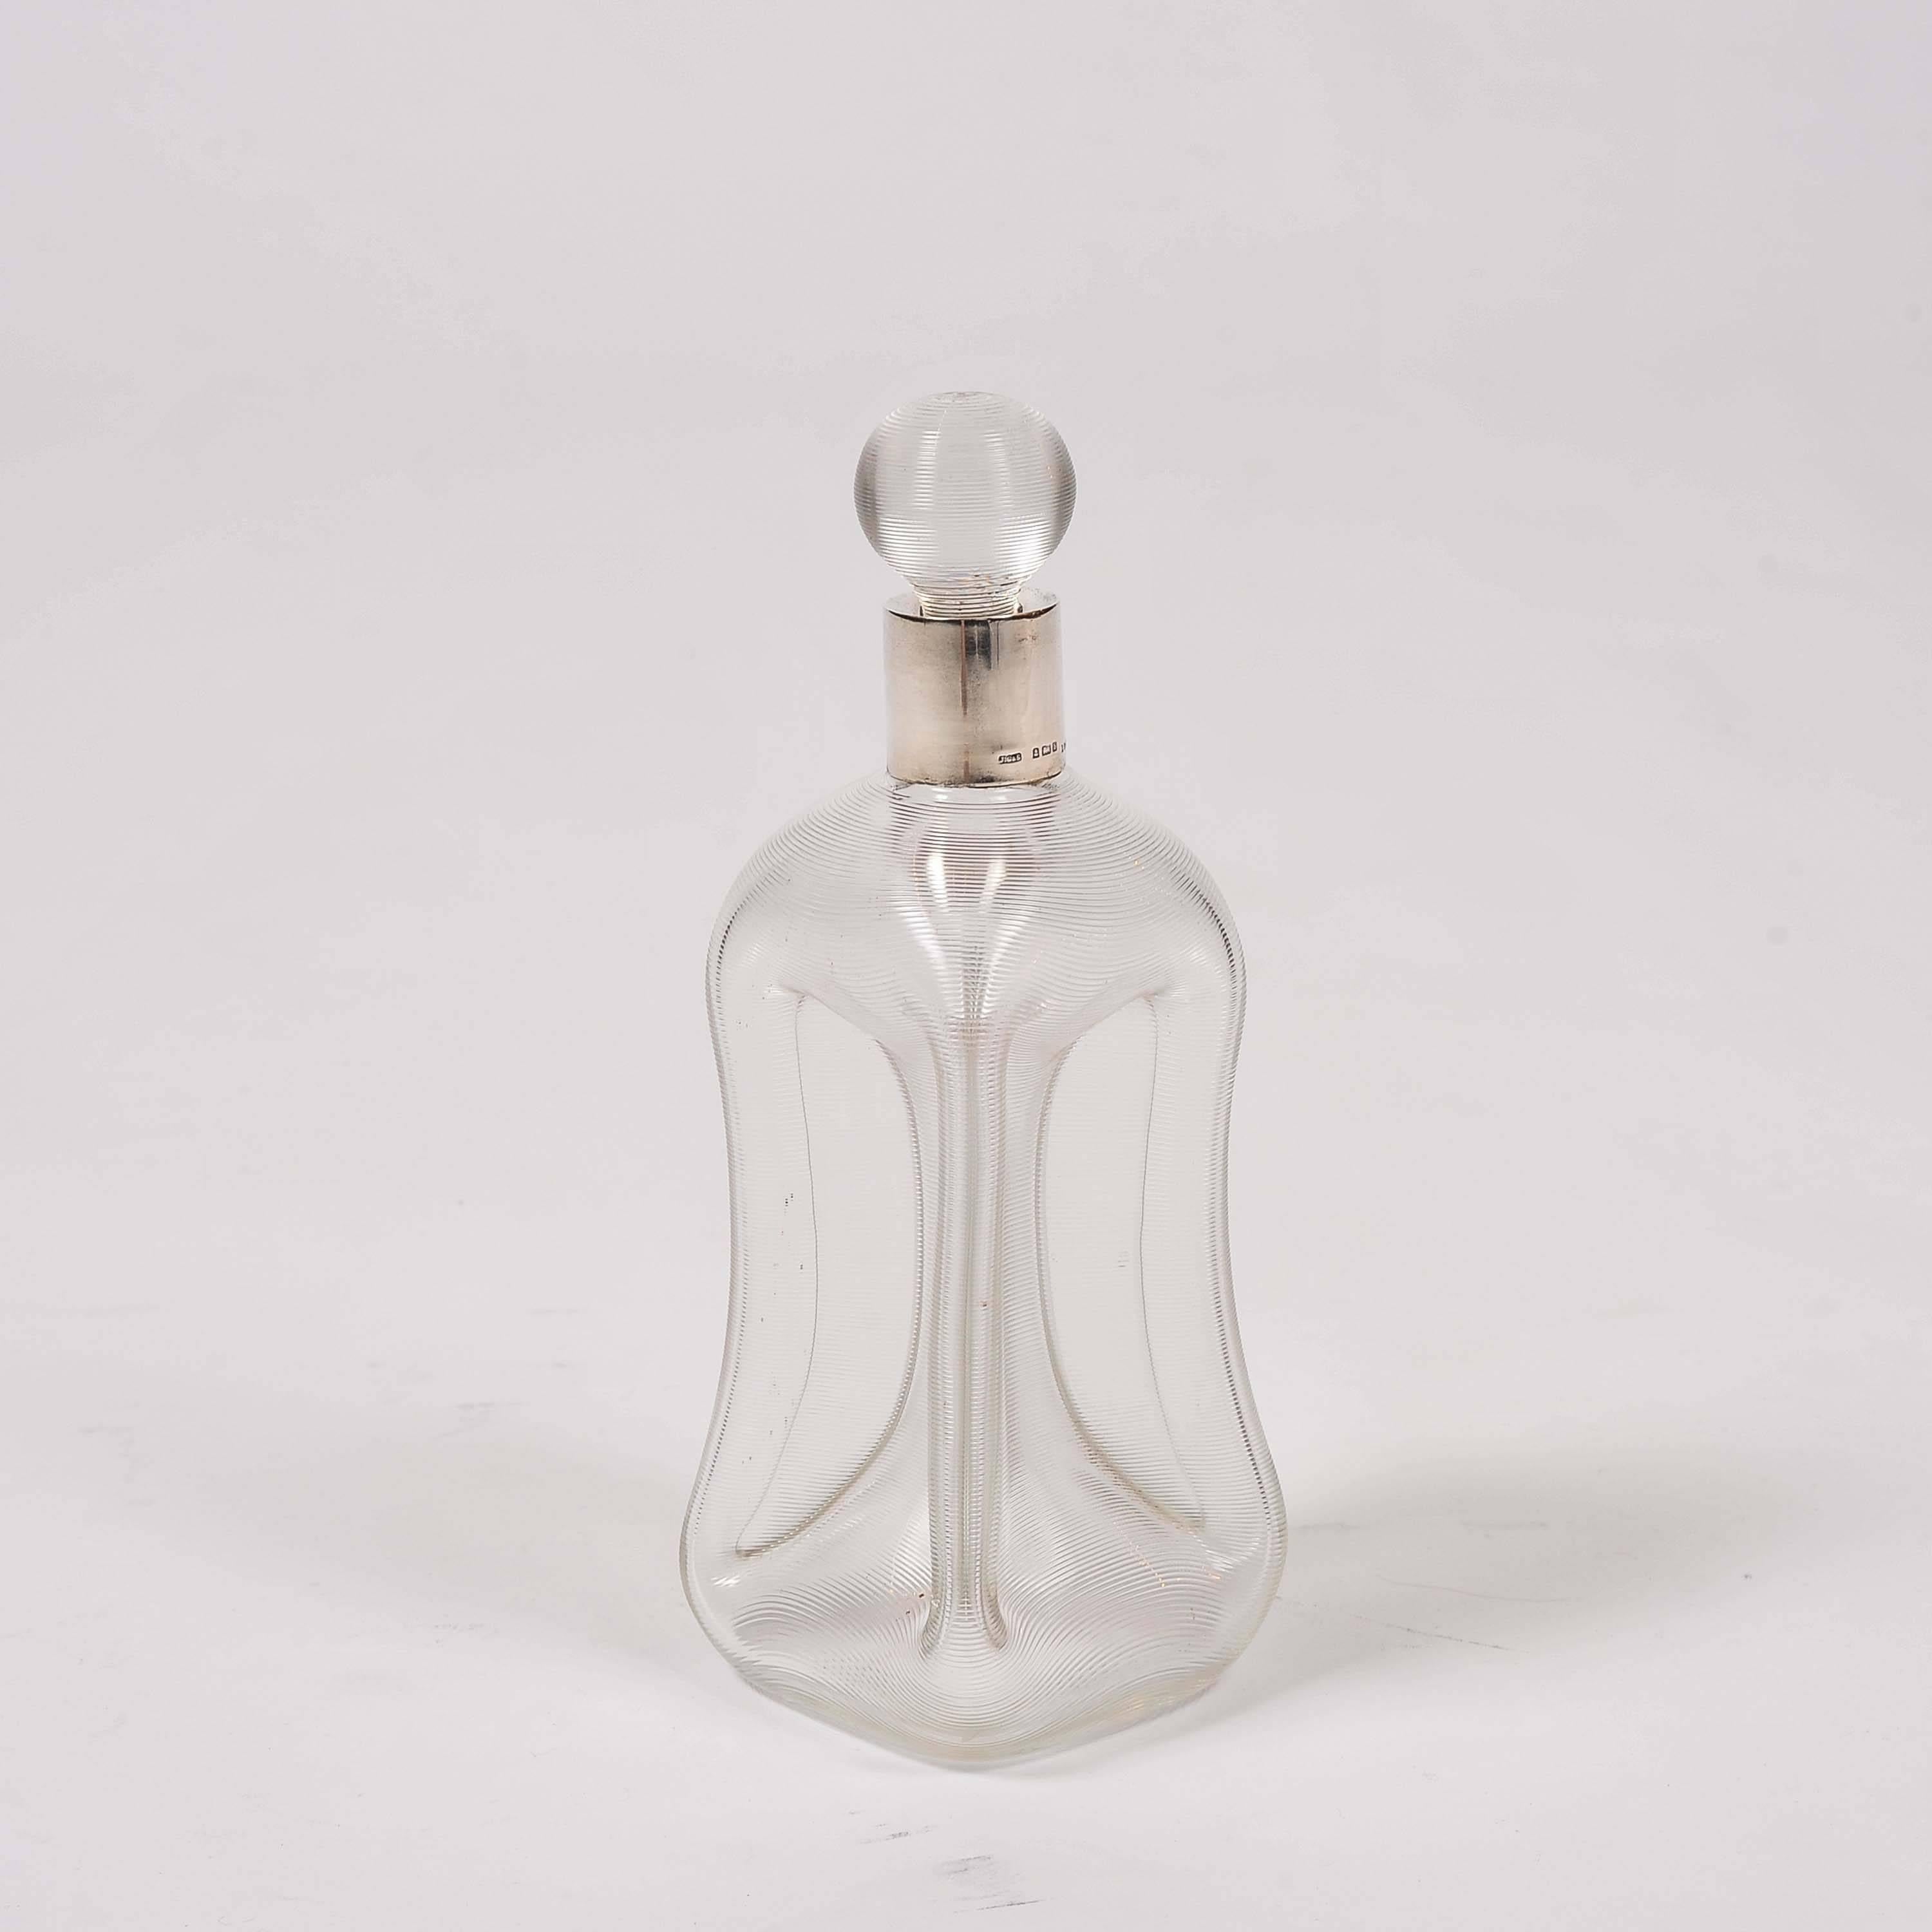 An Edwardian decanter by John Grinsell & Sons, ribbed pinch glass with sterling silver collar. 

Hallmarked Birmingham 1901.

Weight: 0.9 kg.

John Grinsell & Sons History:

The business was established in Birmingham, England, circa 1864, as